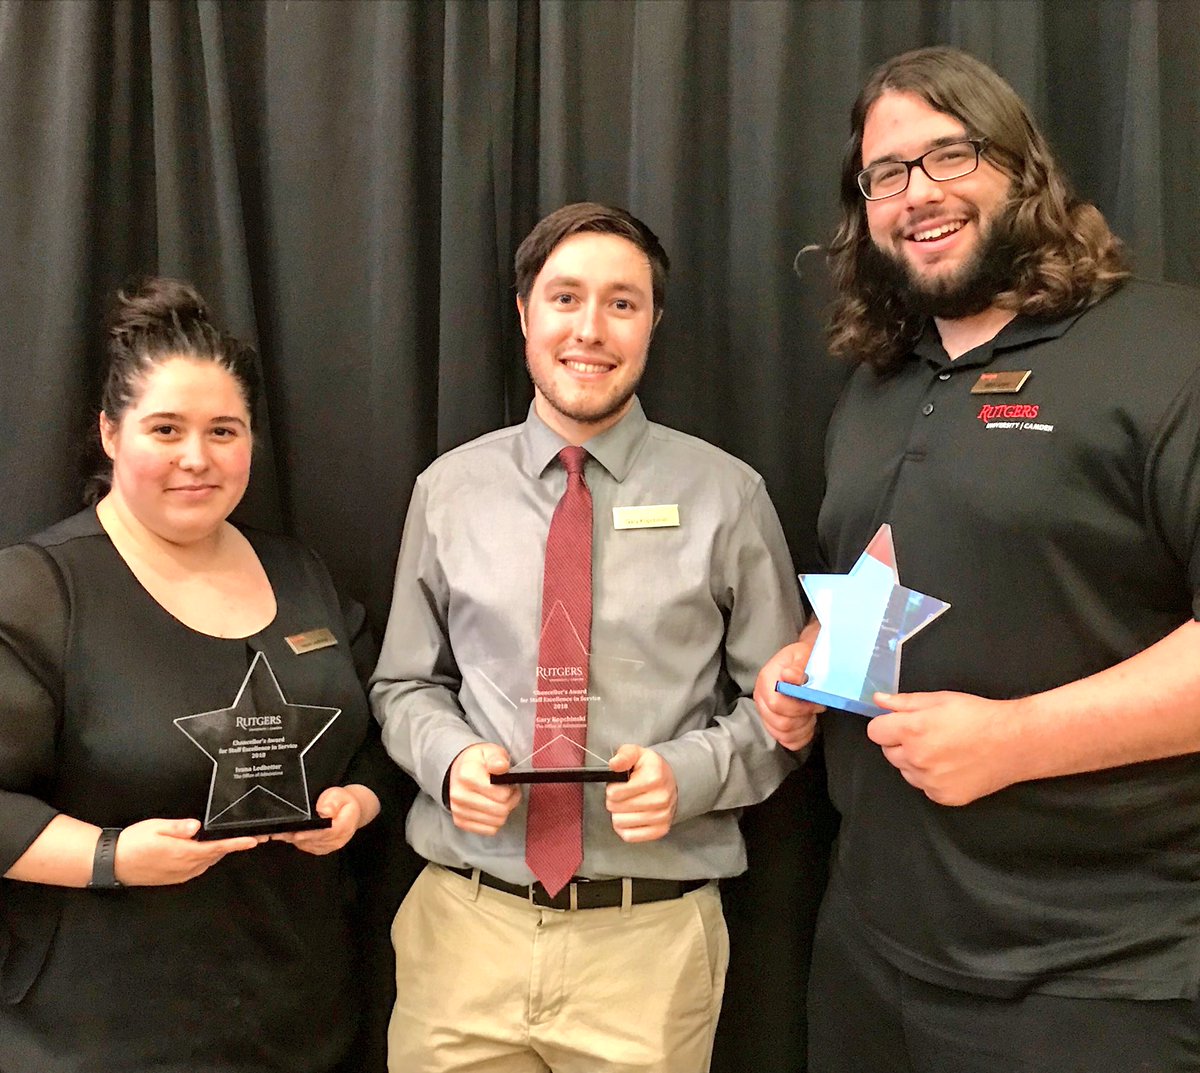 It’s an exciting day for the @RUCamdenApply team! We received the Chancellor’s Award for Staff Excellence in Service for our enrollment growth and successful events over the last year.  #AwardWinners #StaffExcellence #RutgersCamden